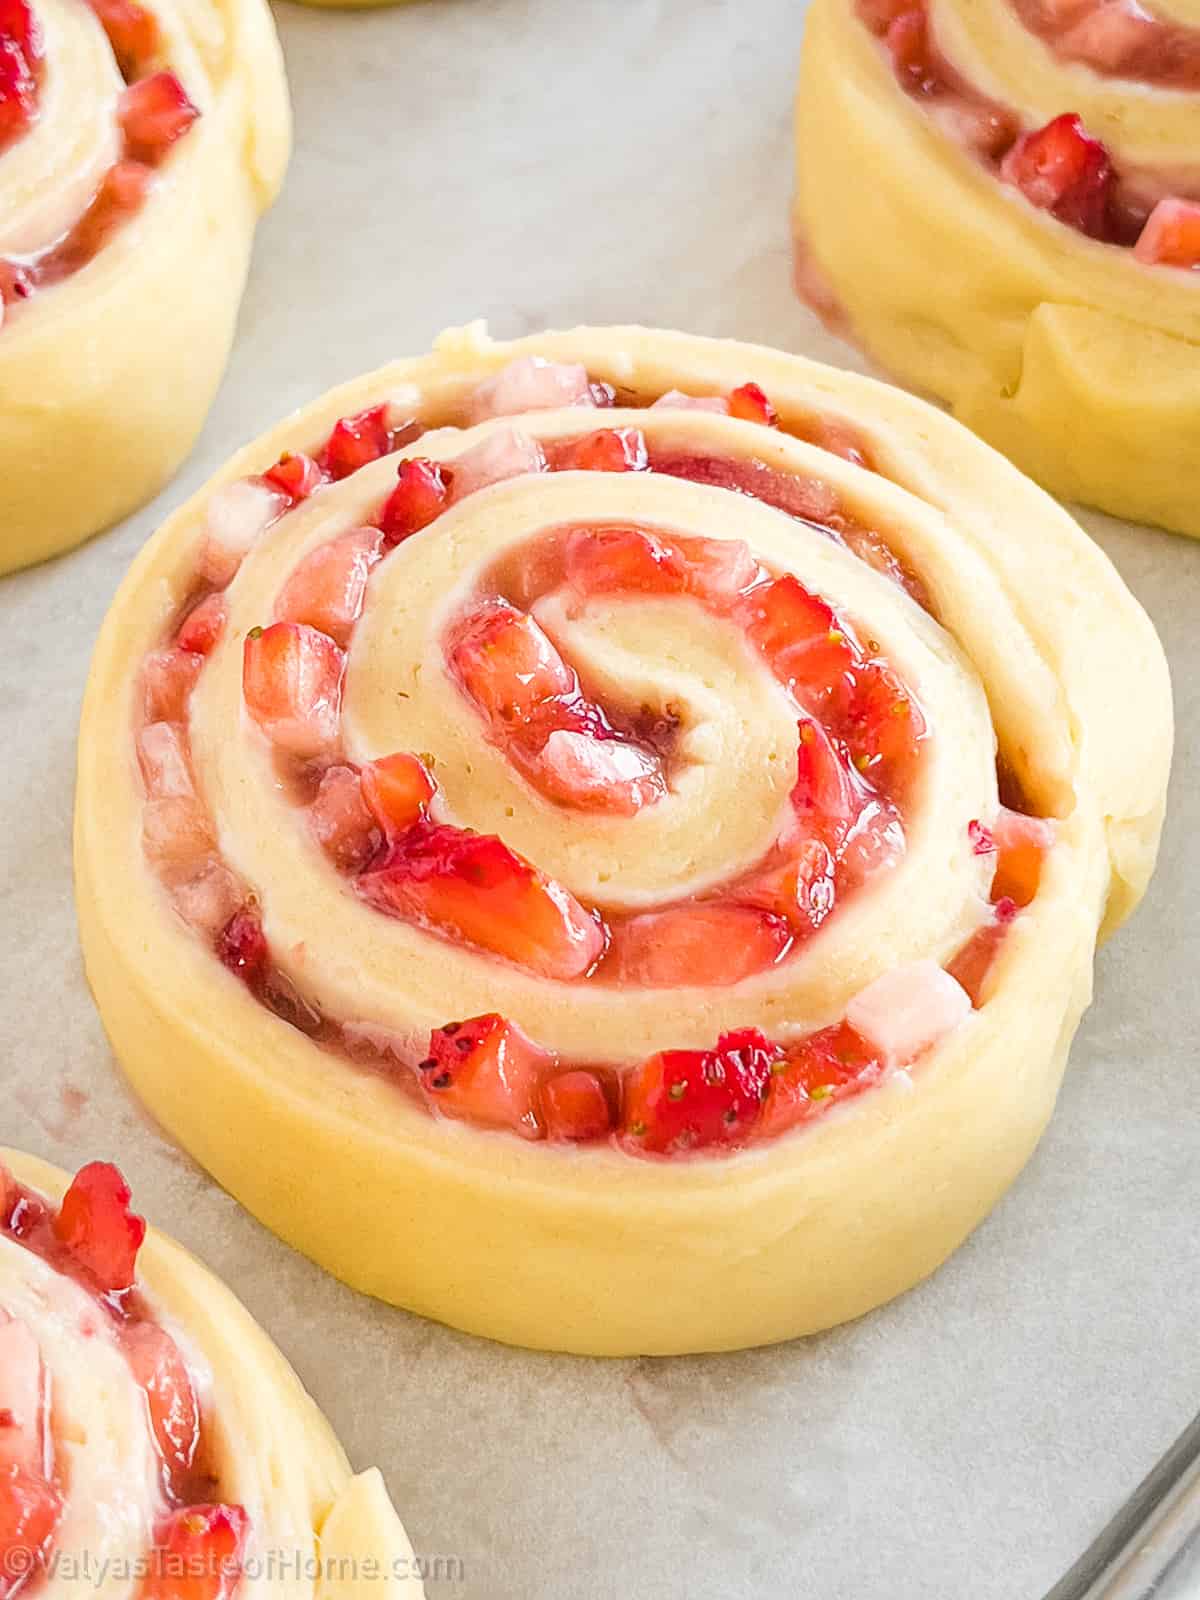 Let the strawberry rolls rise for another 30 minutes.